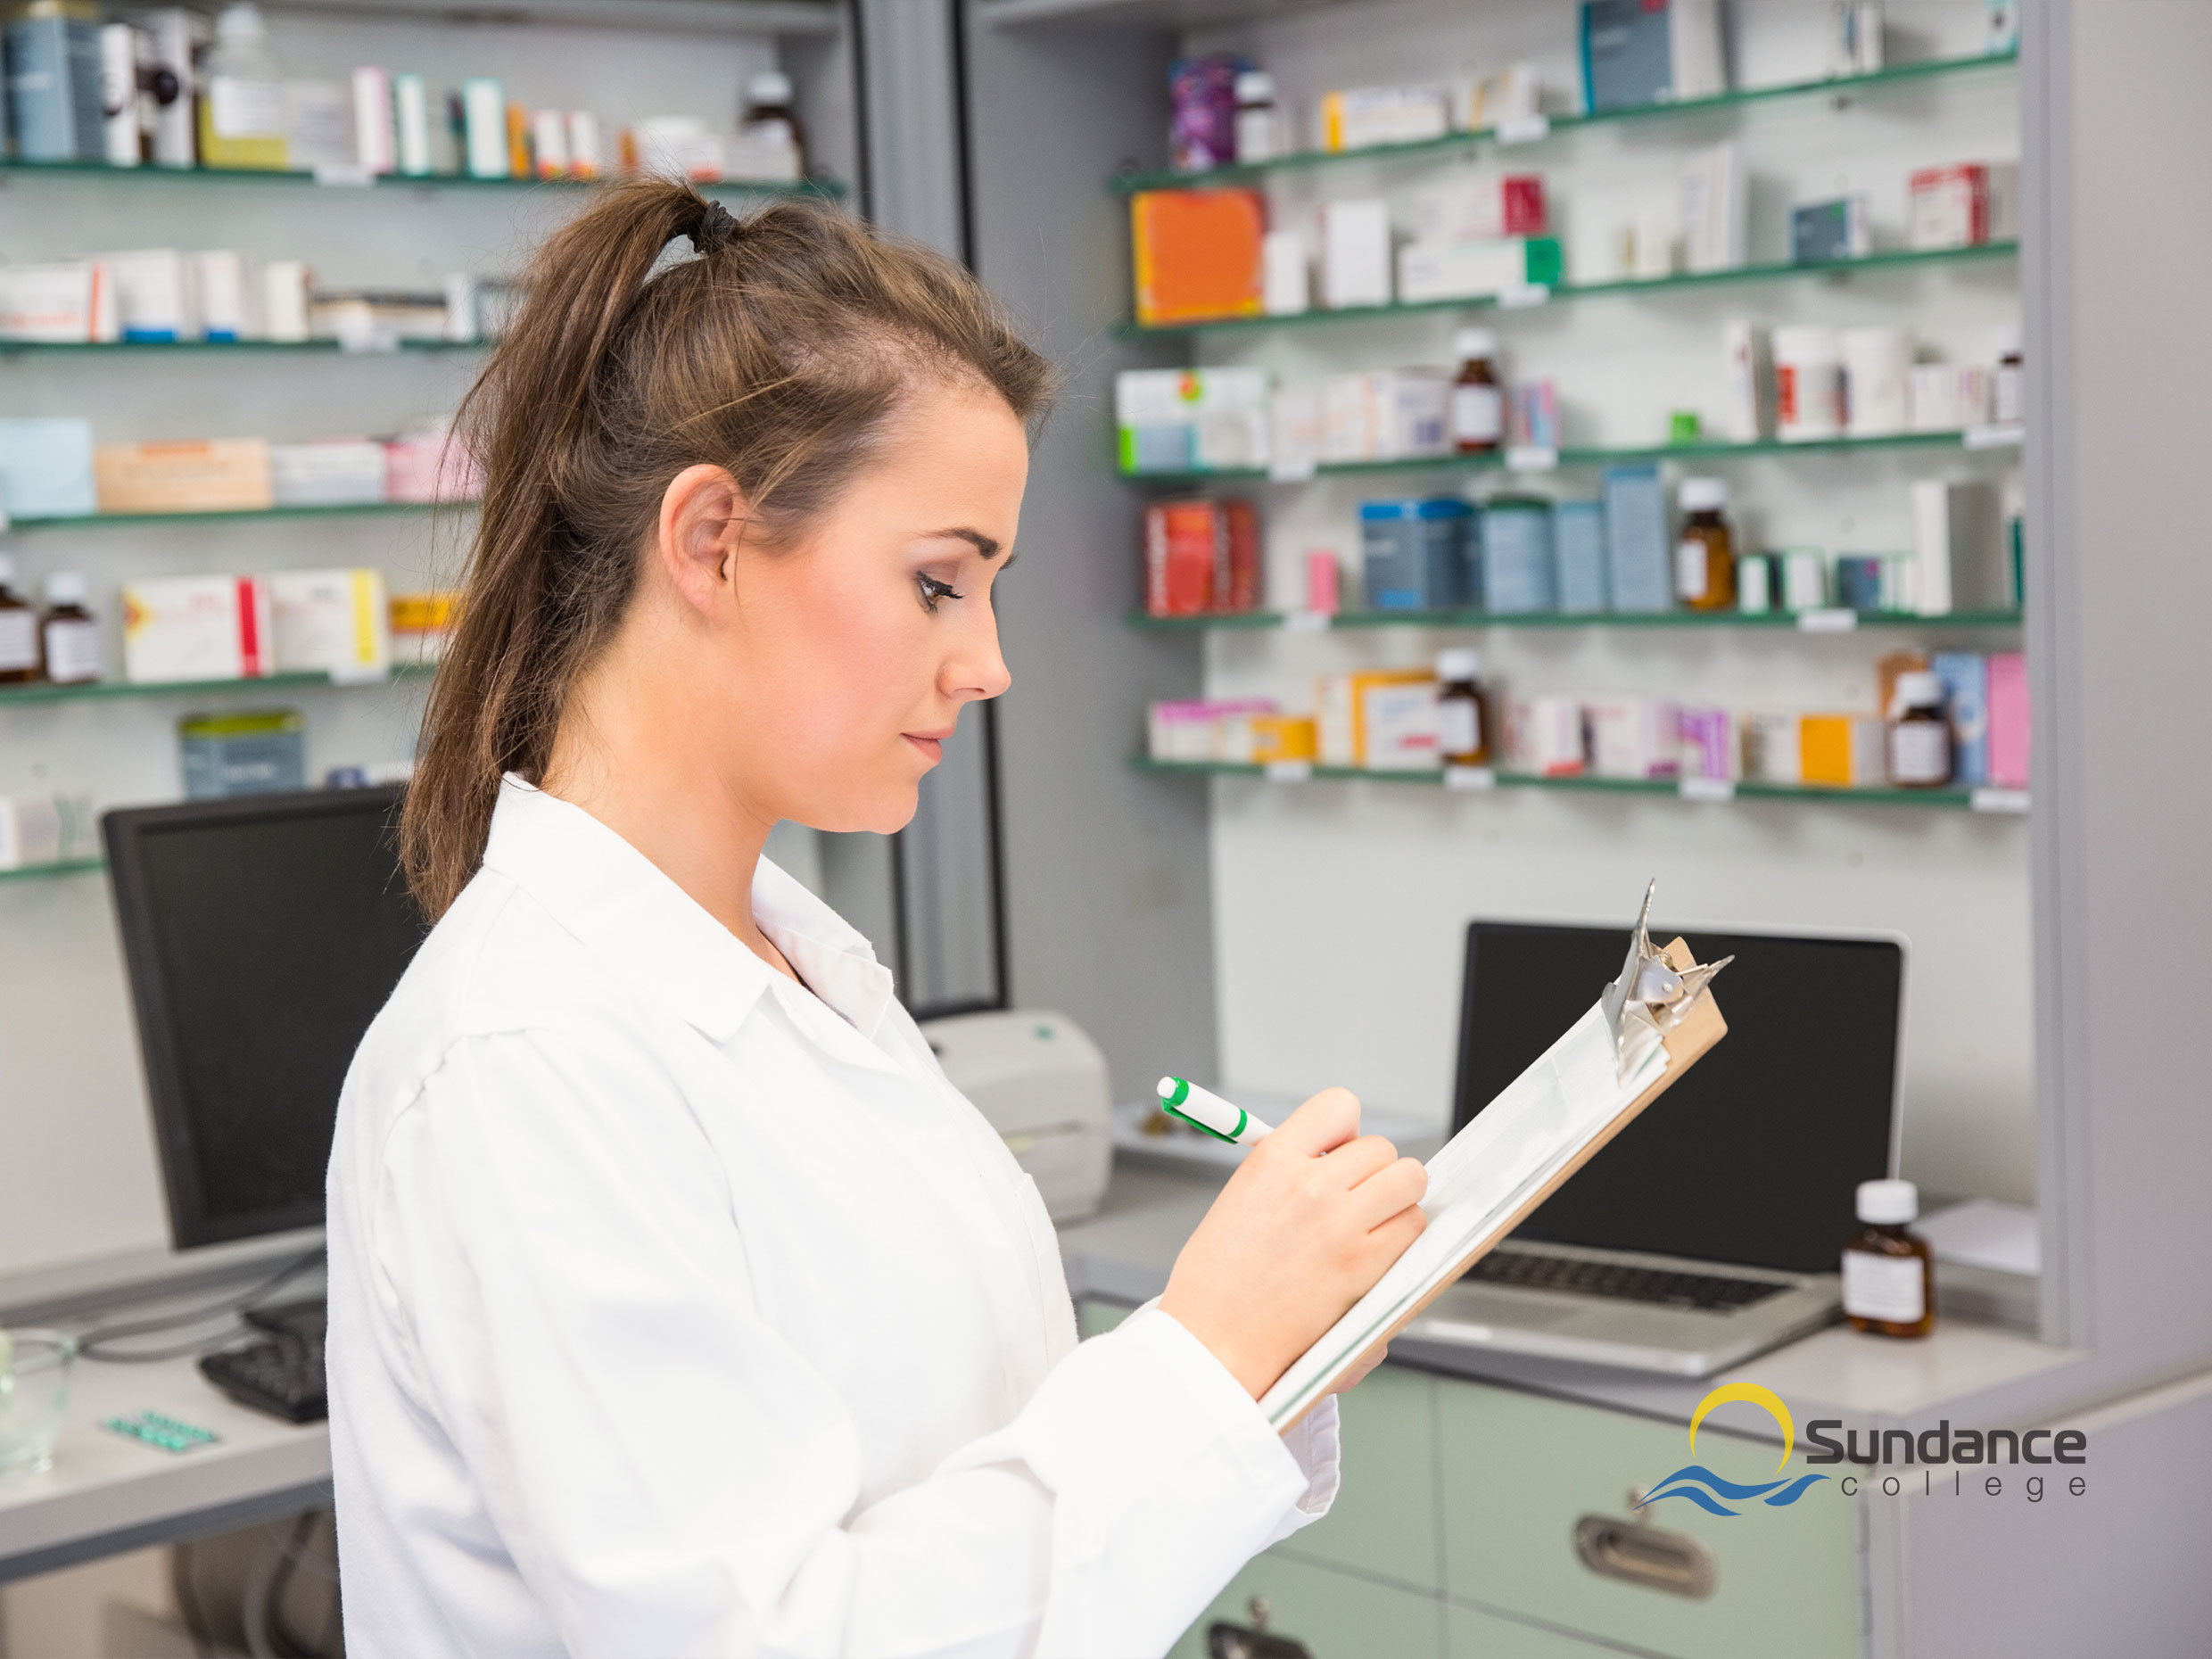 Pharmacy assistant intern listing down inventory record updates